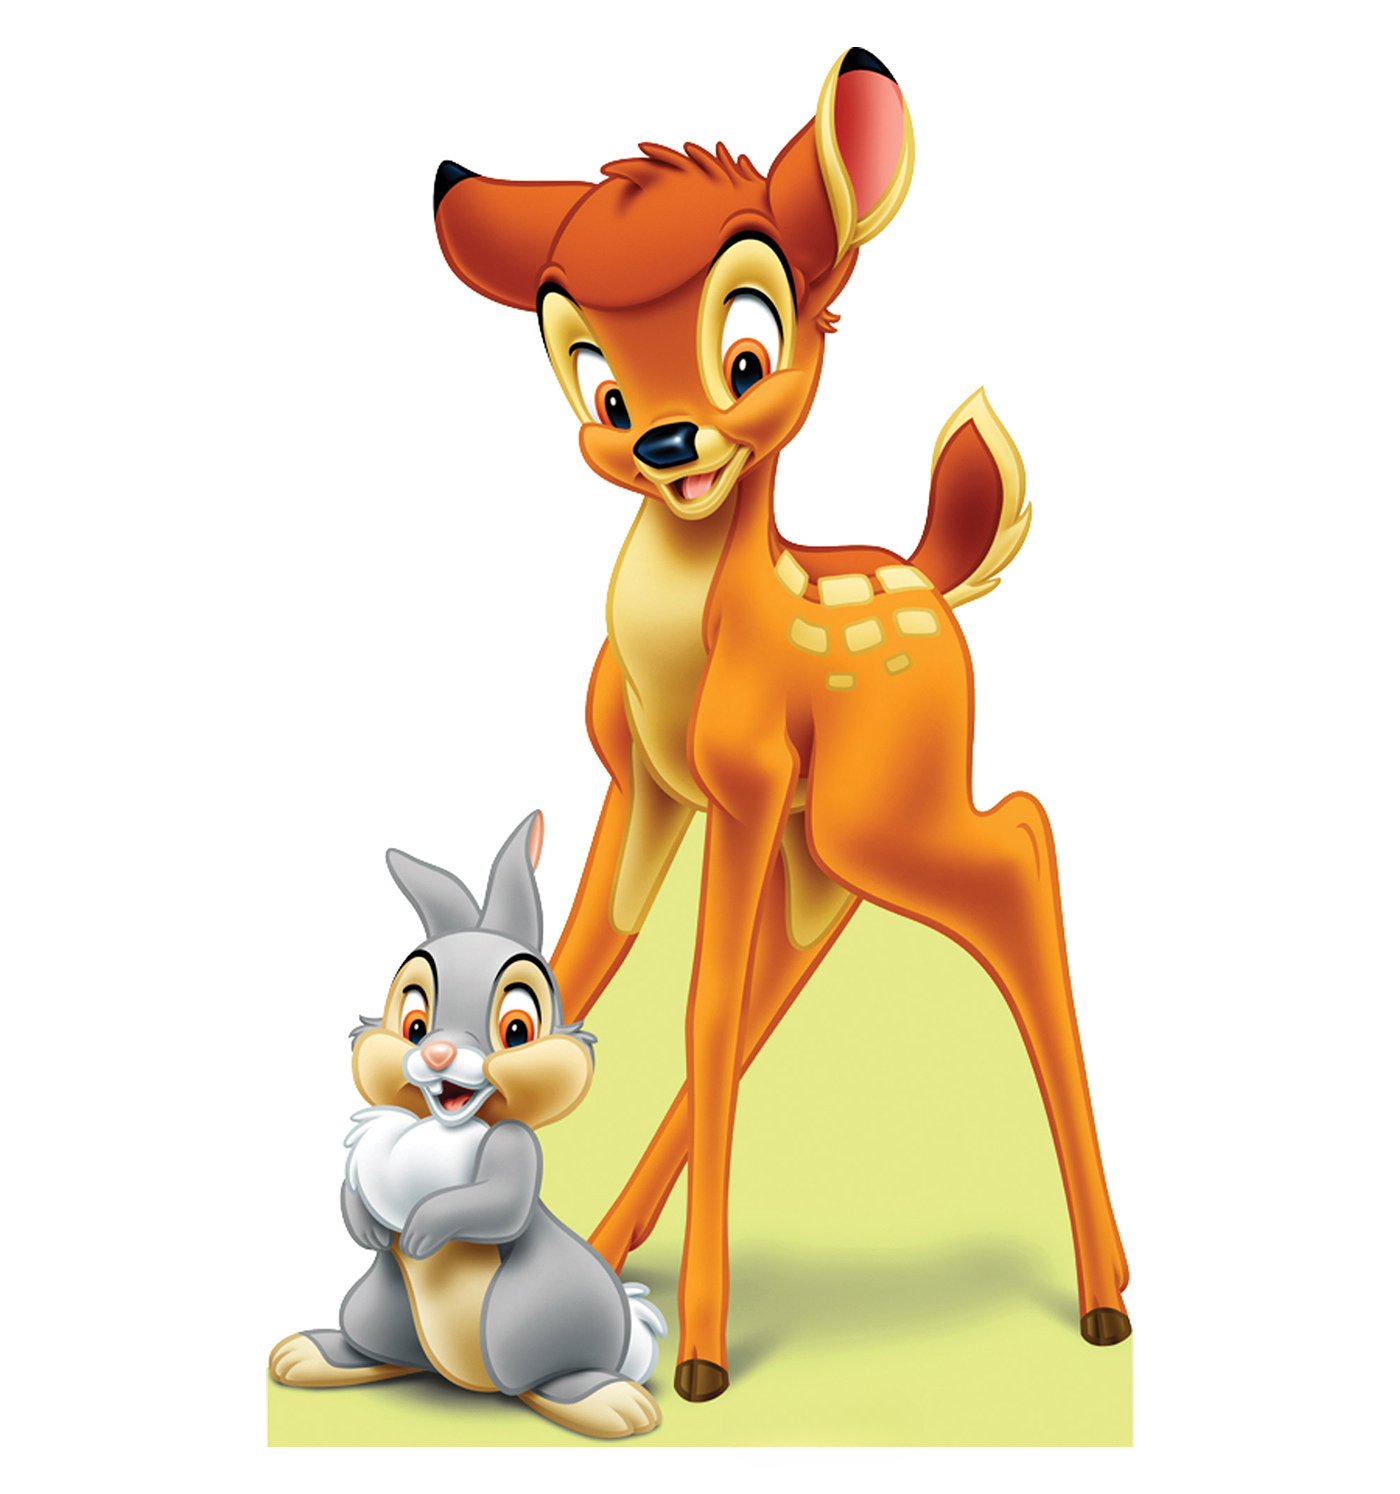 Disney's classic, Bambi, continues to bring smiles to generations of viewers